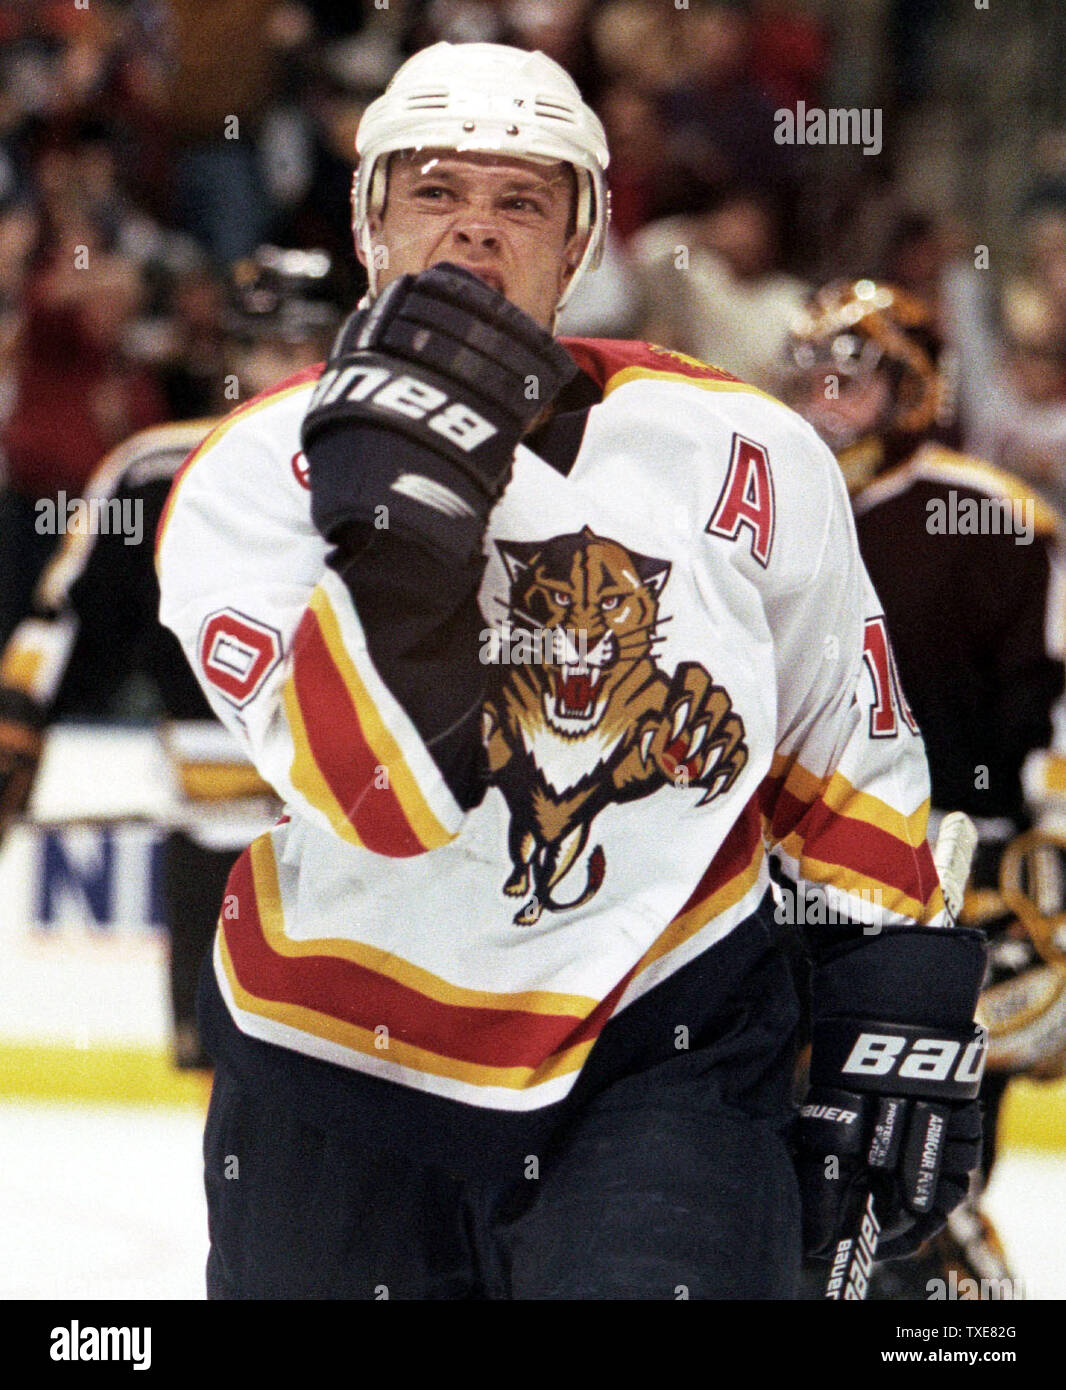 MIA2000011201 - 12 JANUARY 2000 - MIAMI, FLORIDA, USA: Florida Panthers Pavel  Bure scores the game winning goal past New York Islander goalie Kevin Weeks  in second period NHL action. The Panthers